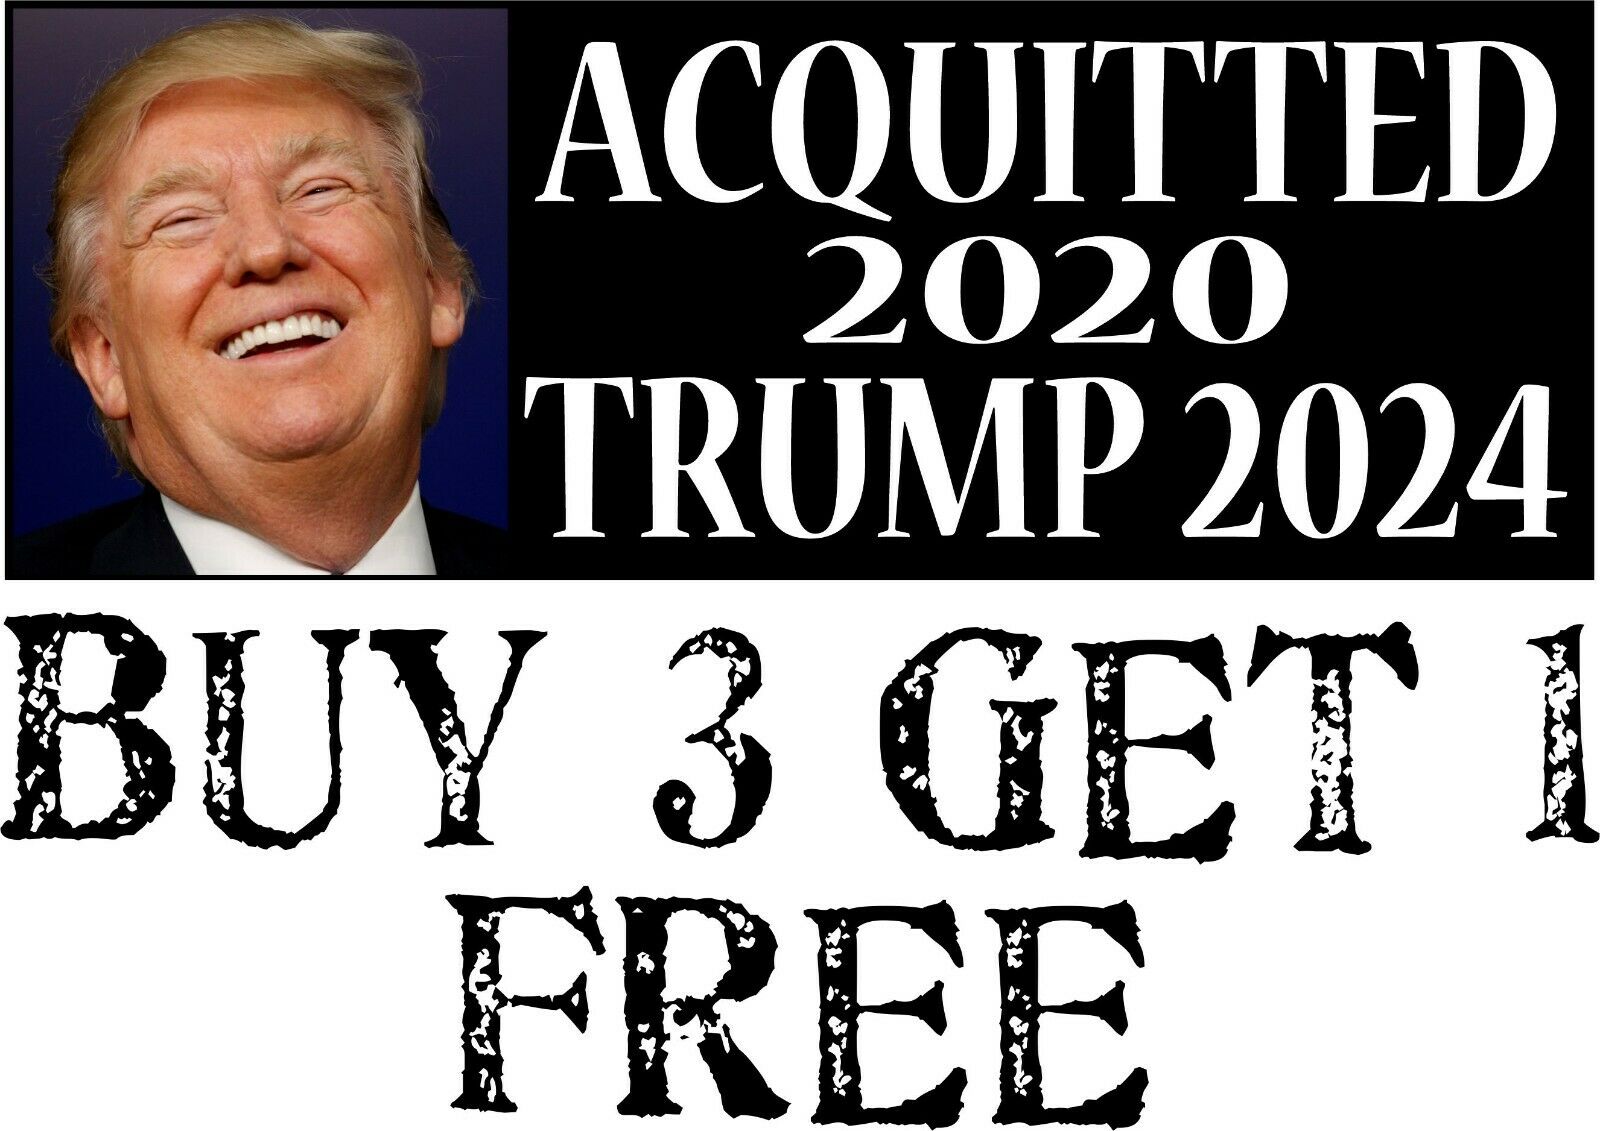 TRUMP ACQUITTTED Bumper Sticker - Acquitted 2020 TRUMP 24 STICKER 8.7"x3" - Powercall Sirens LLC